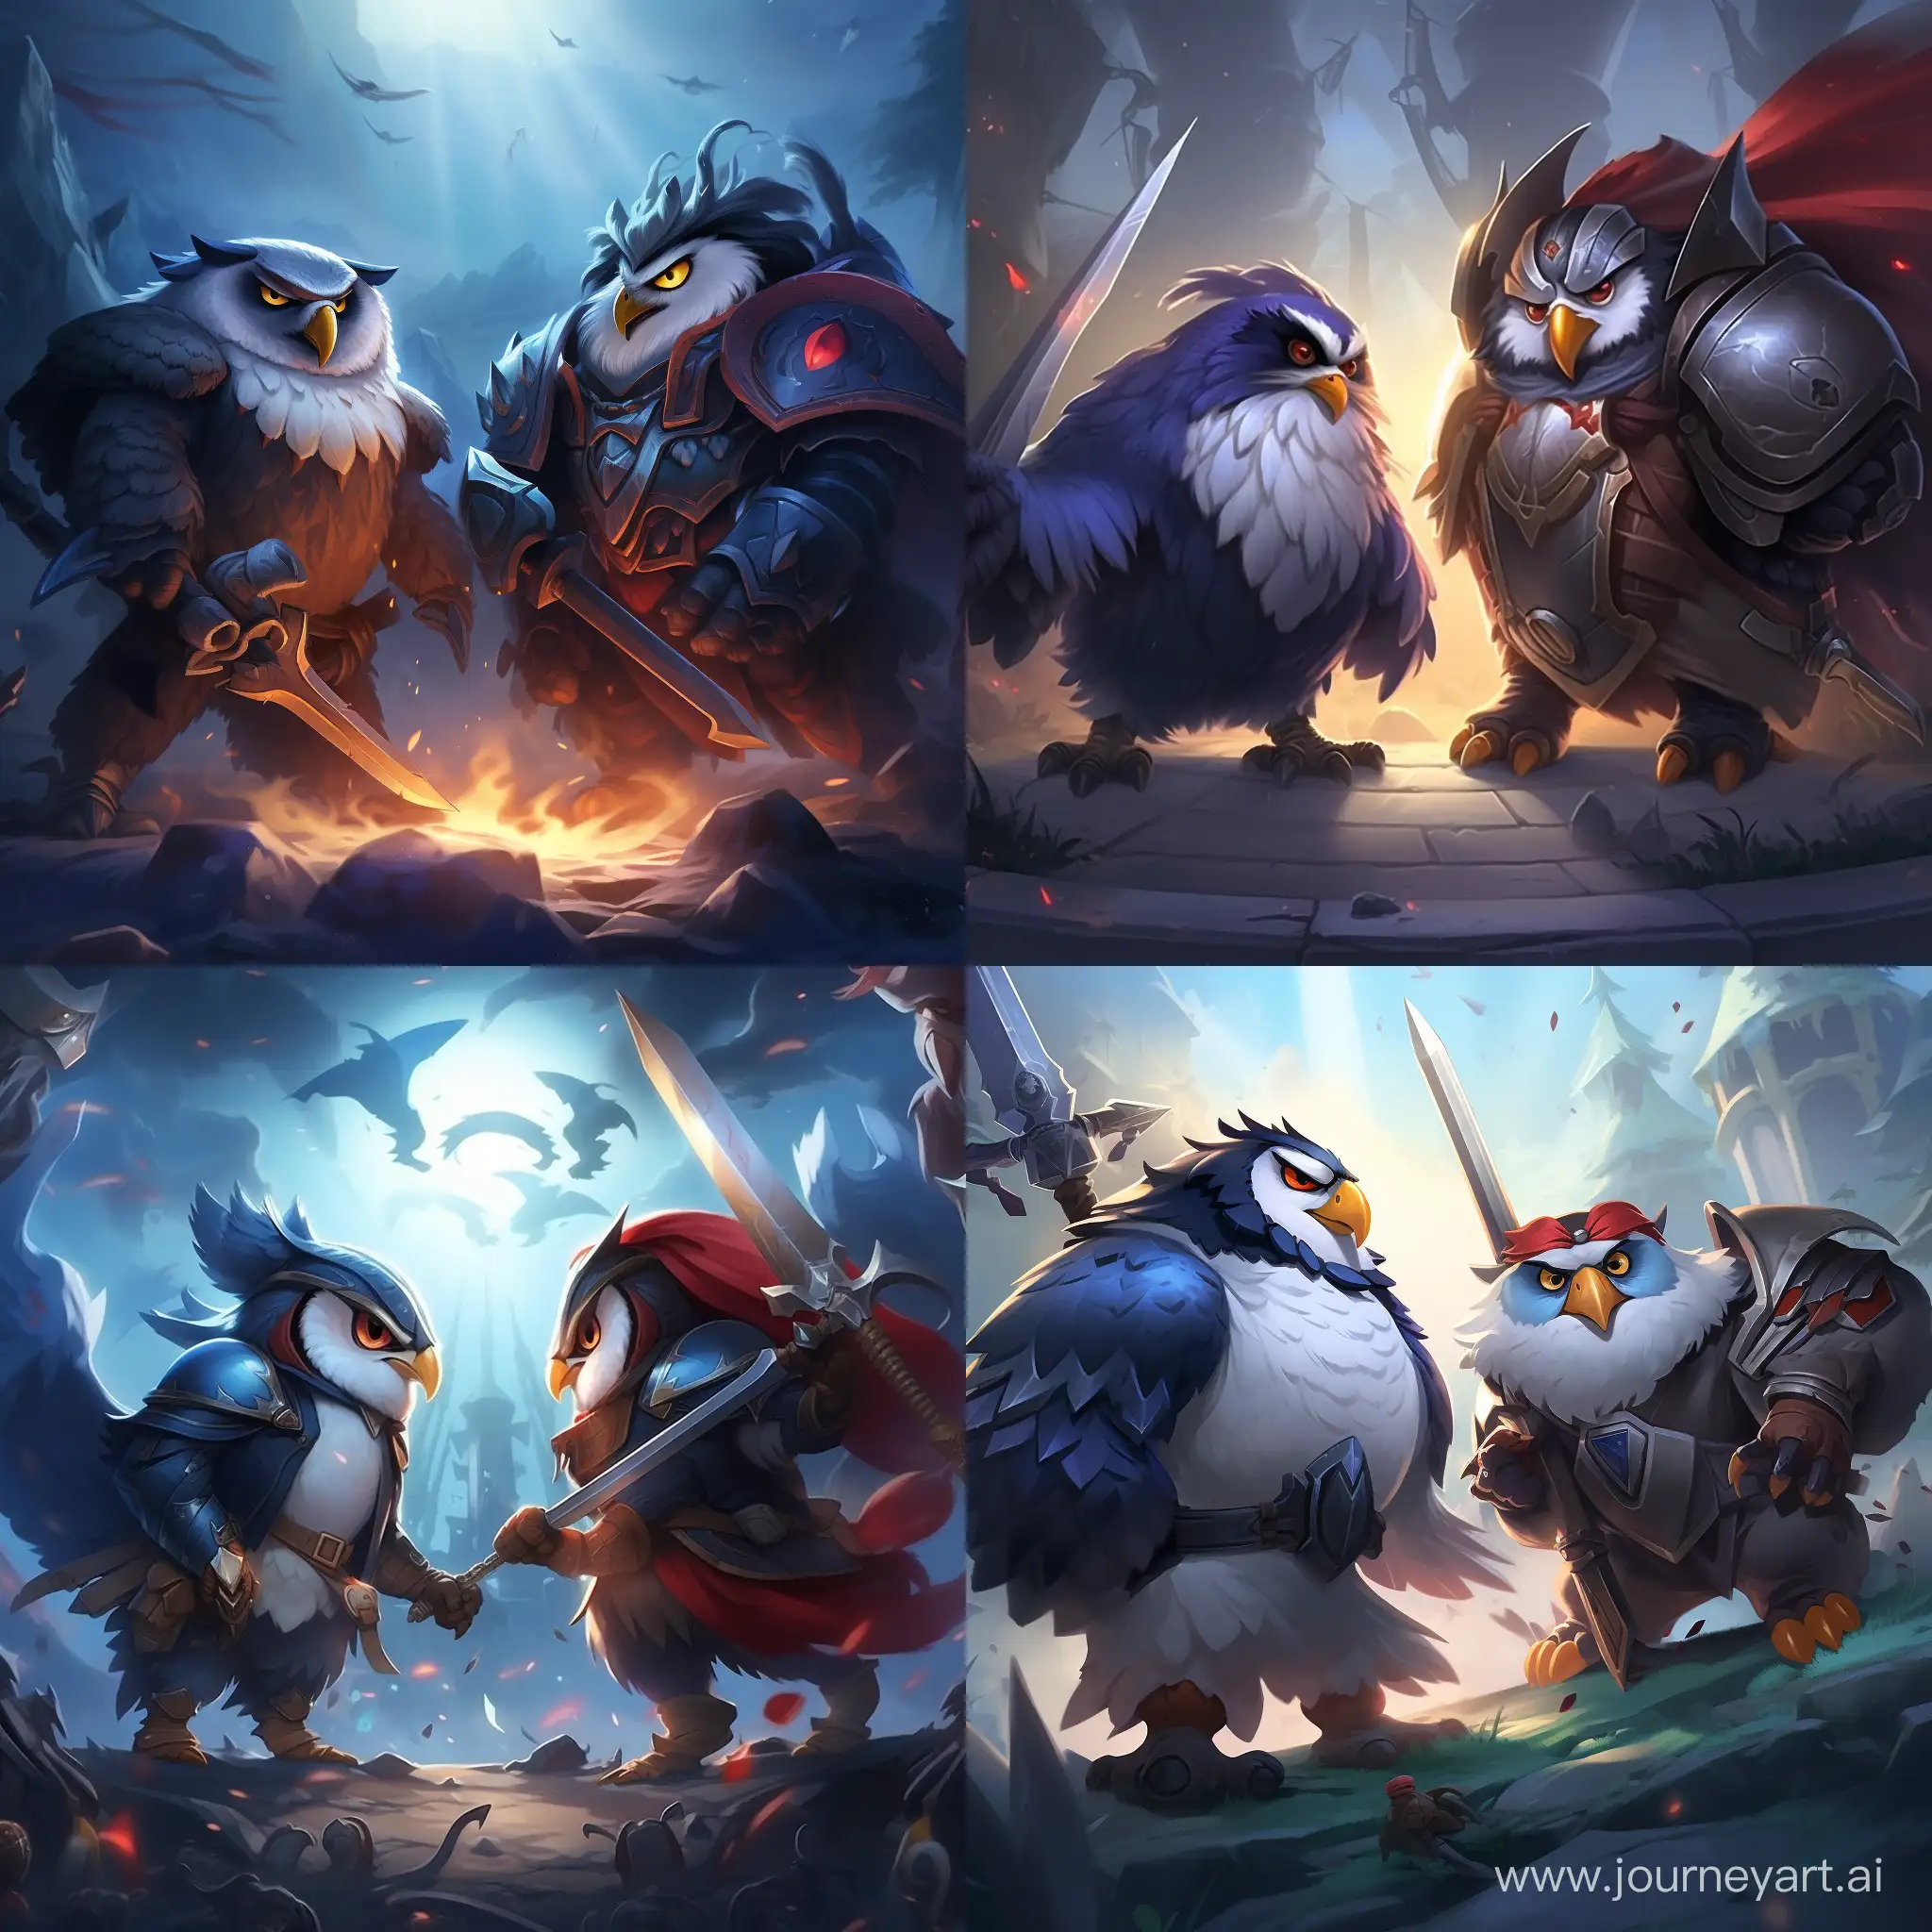 penguin and owl playing teamfight tactics together on pc, from riot games